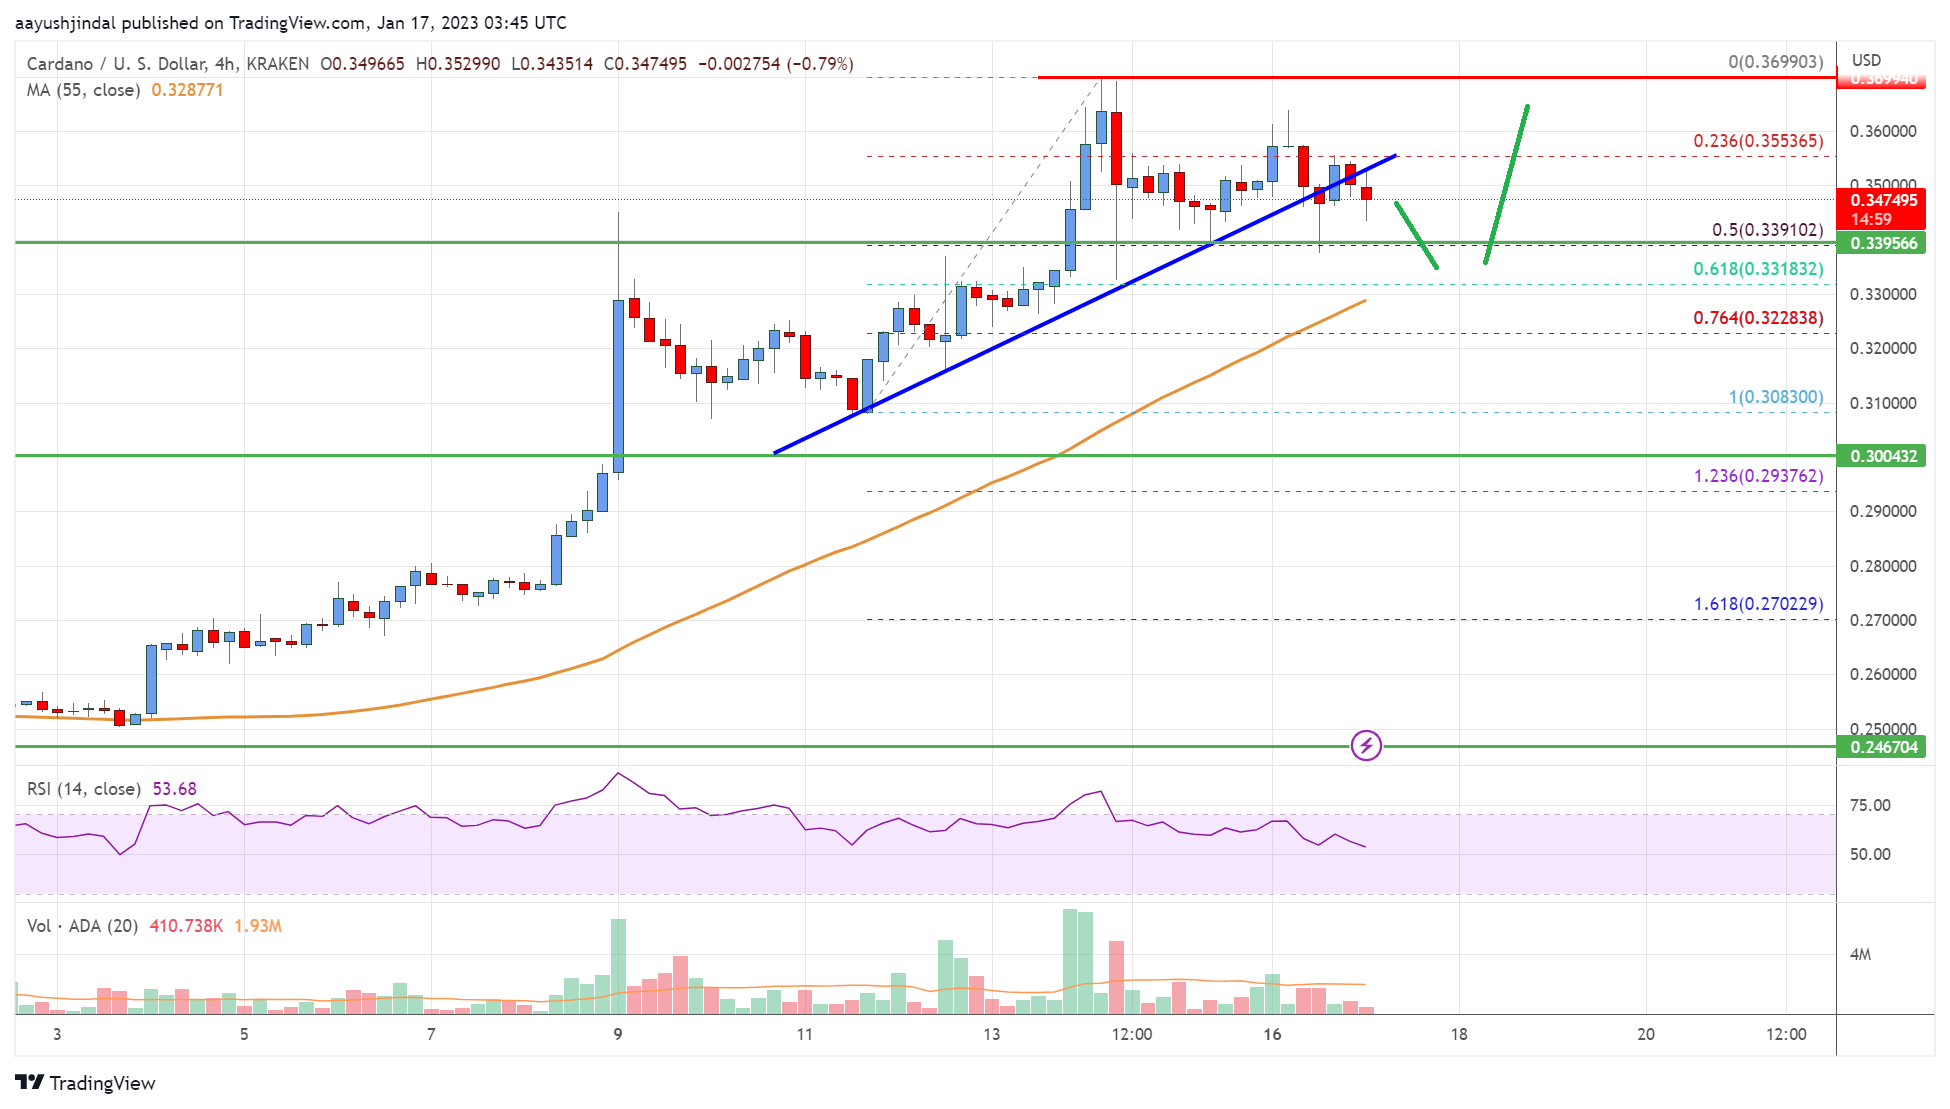 Cardano (ADA) Price Analysis: More Gains Likely Above $0.38